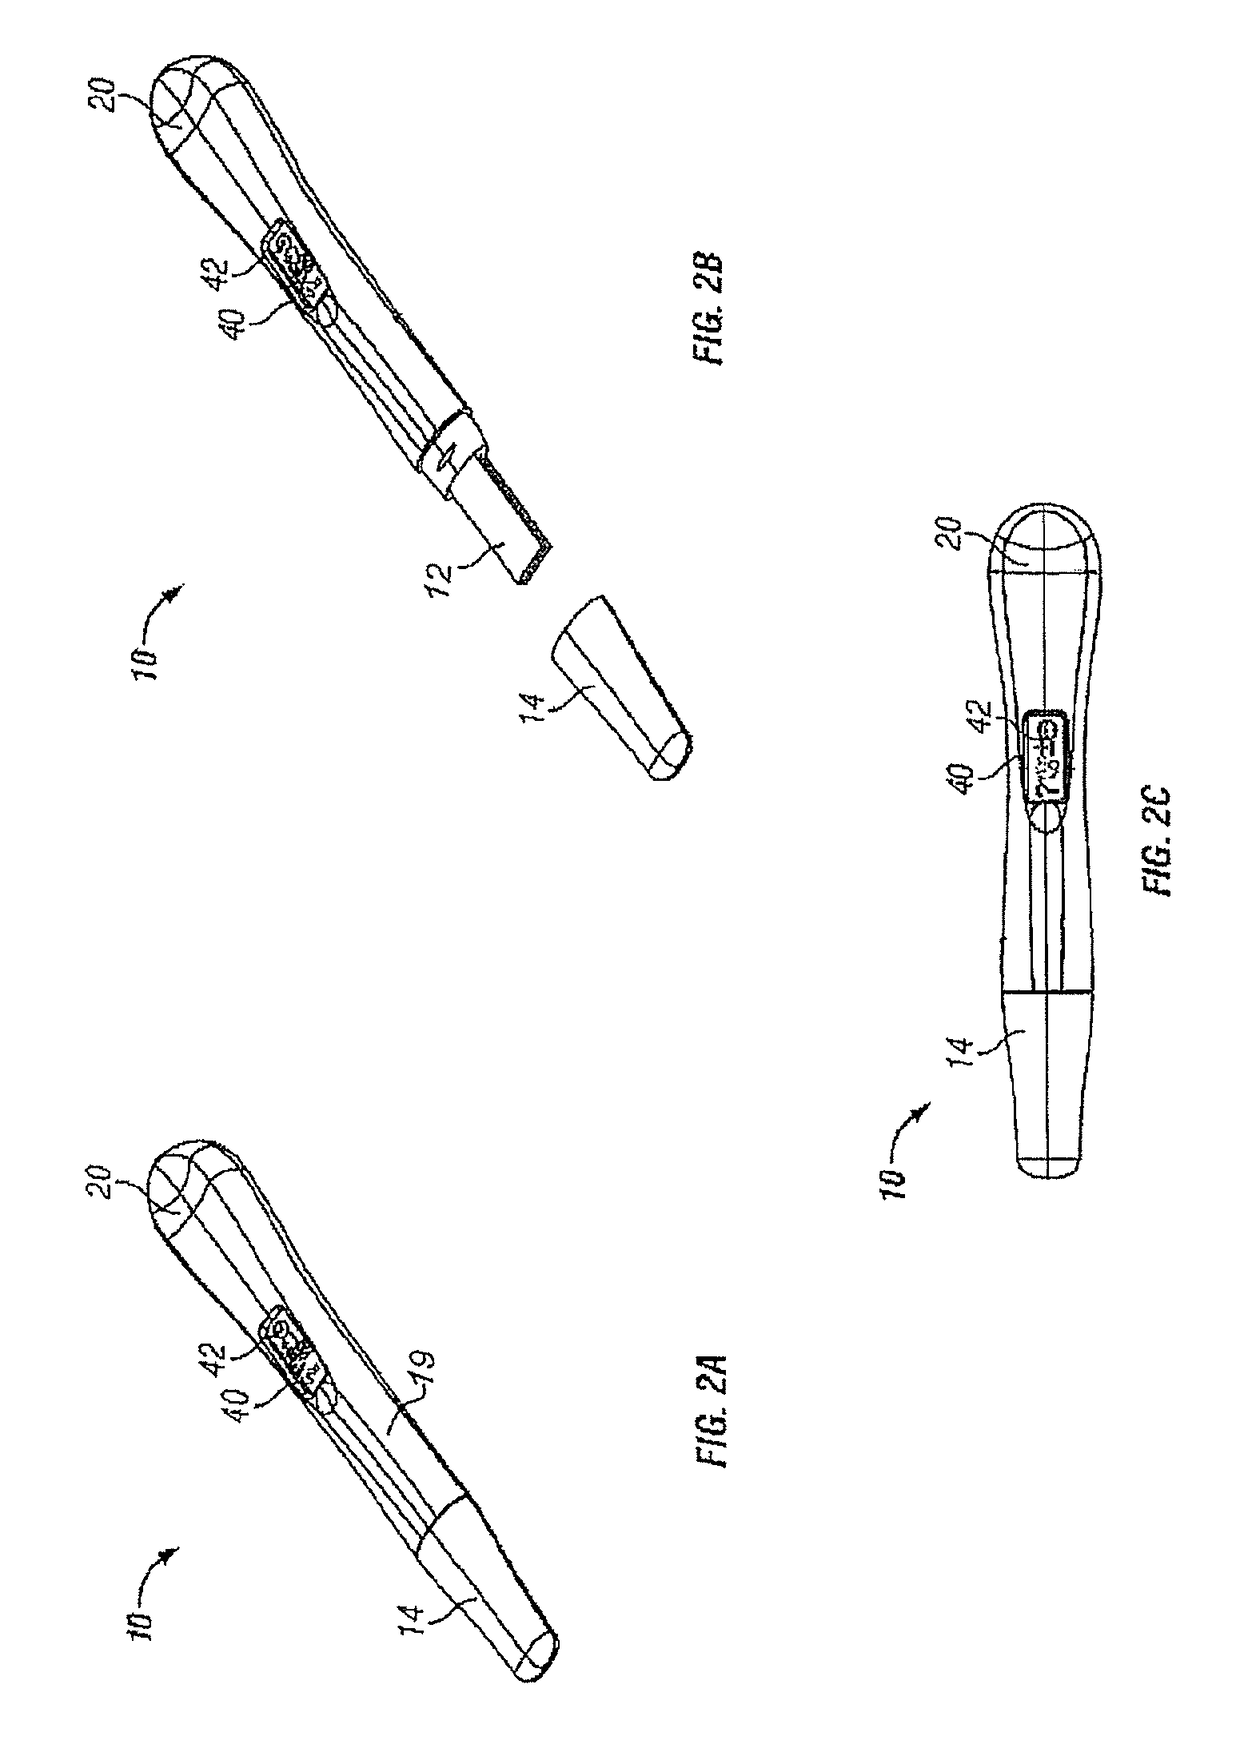 Diagnostic test device with audible feedback